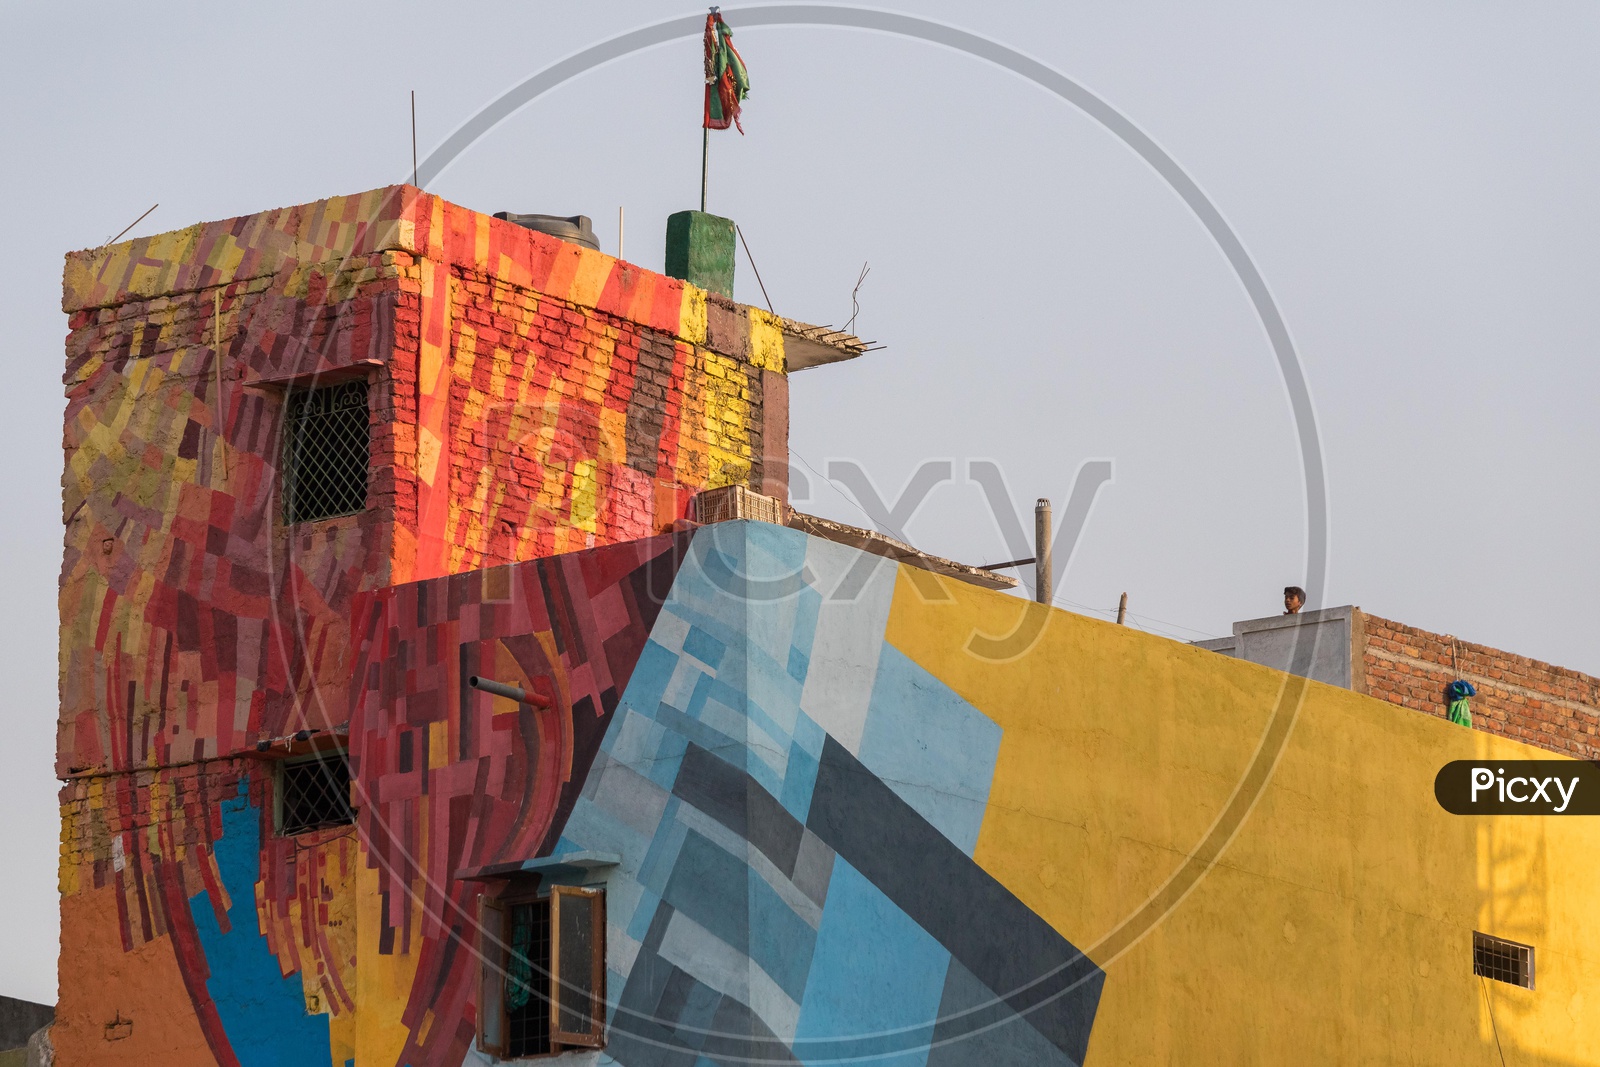 Building Or Wall Arts in Ms Maqtha Art District